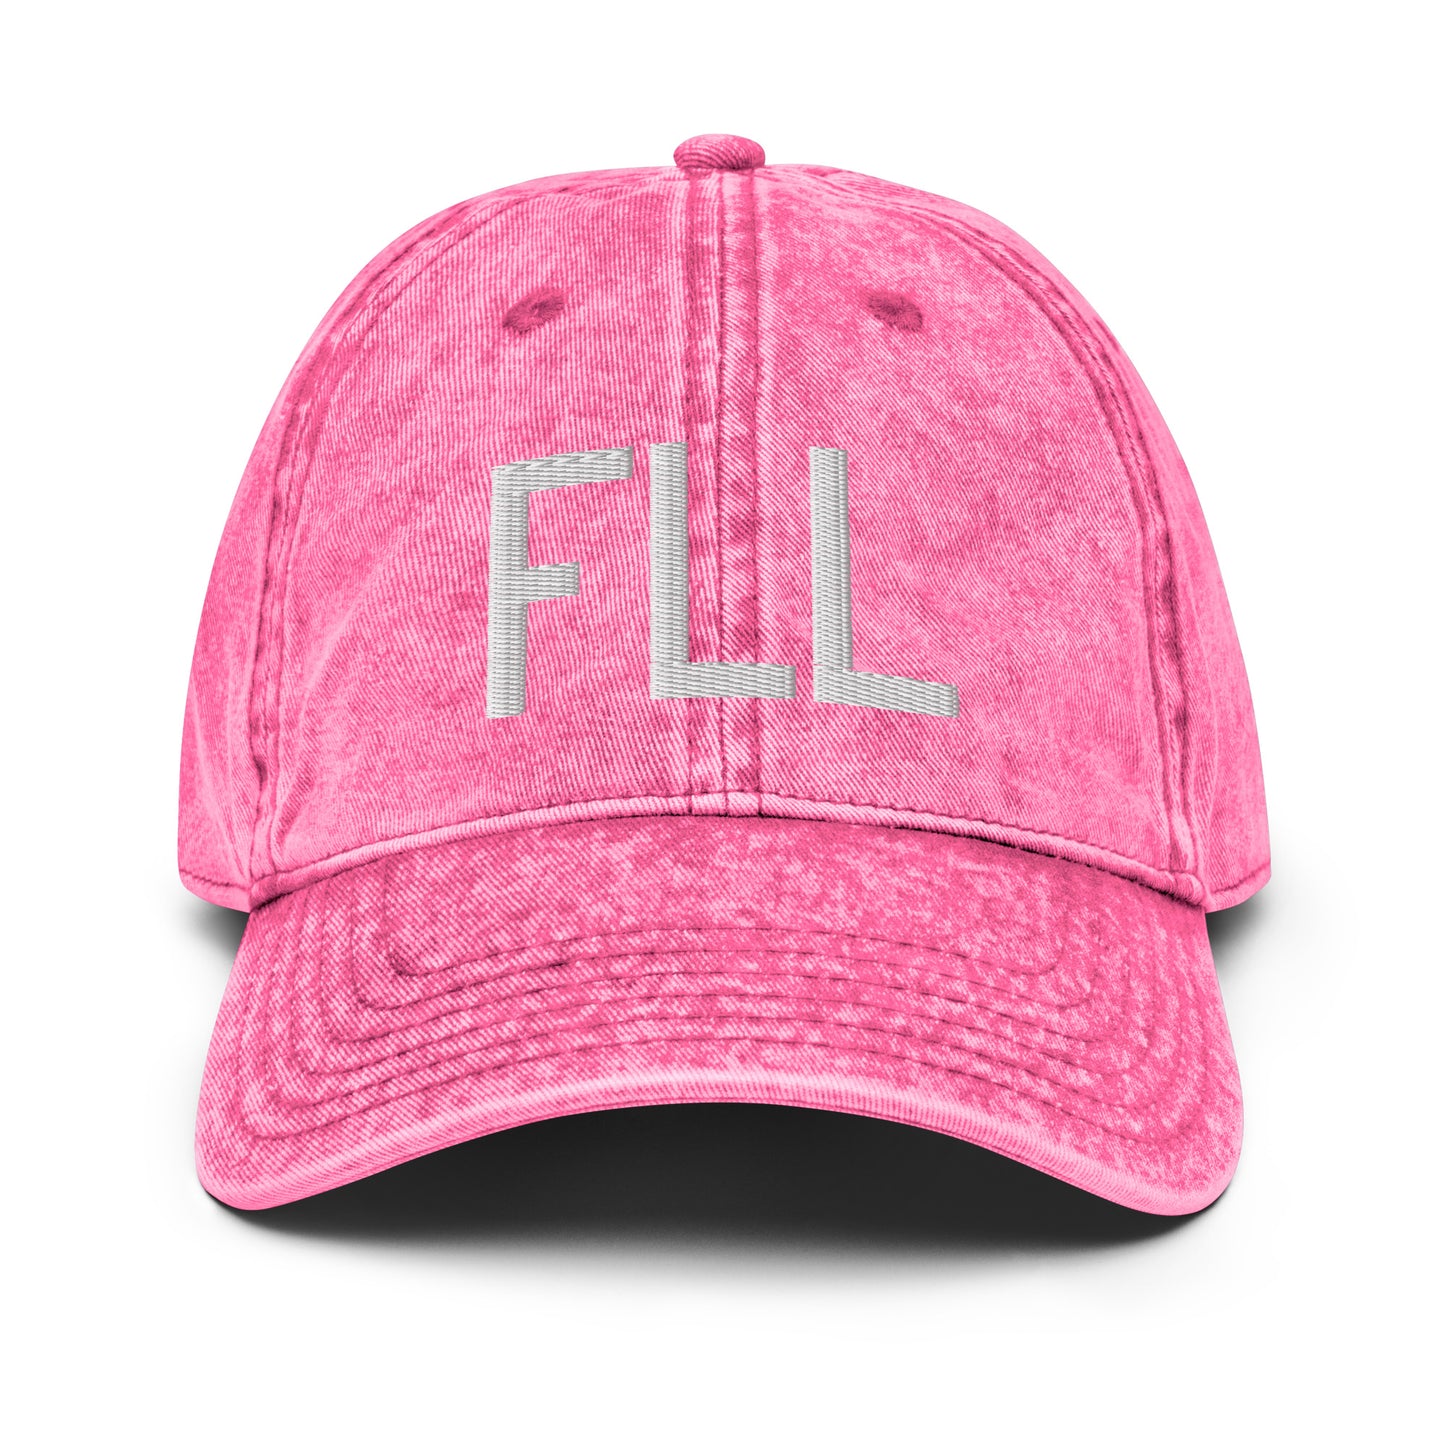 Airport Code Twill Cap - White • FLL Fort Lauderdale • YHM Designs - Image 25